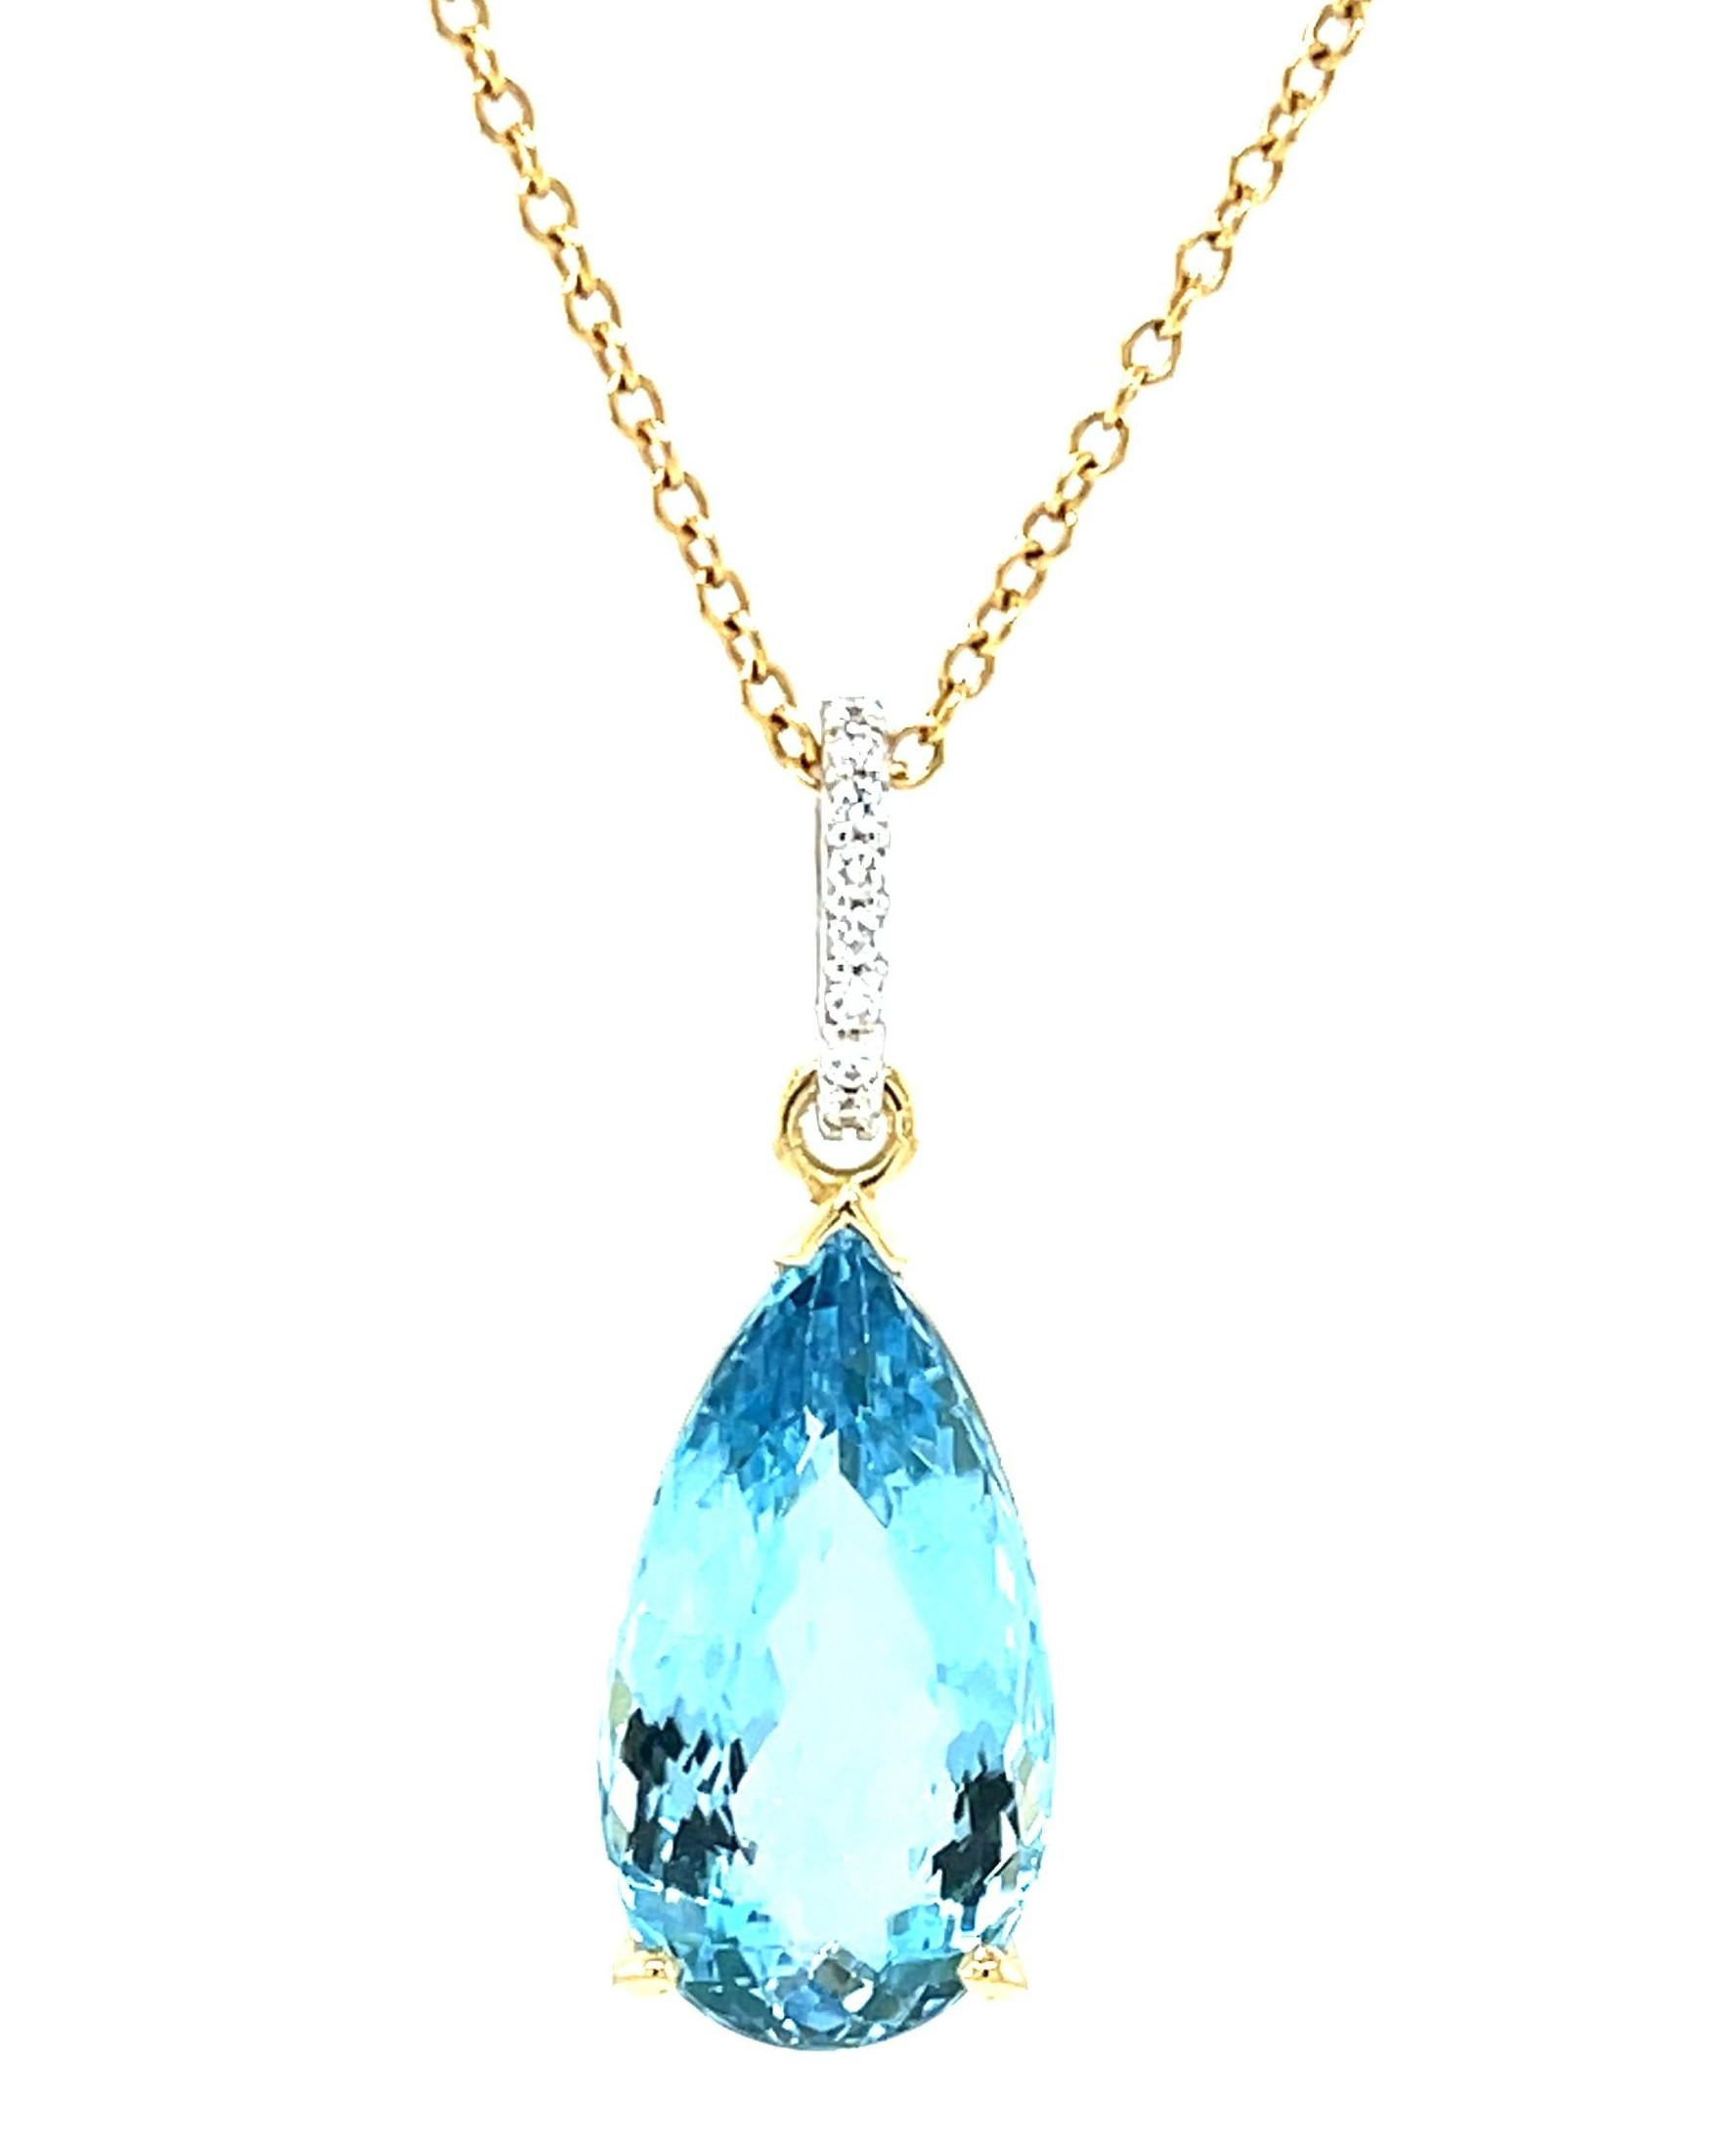 This gorgeous aquamarine and diamond necklace features a spectacular 8.28 carat pear-shaped aquamarine set in 18k yellow gold. The crystalline aquamarine is a top quality gemstone with superior bright blue color and exceptional brilliance!